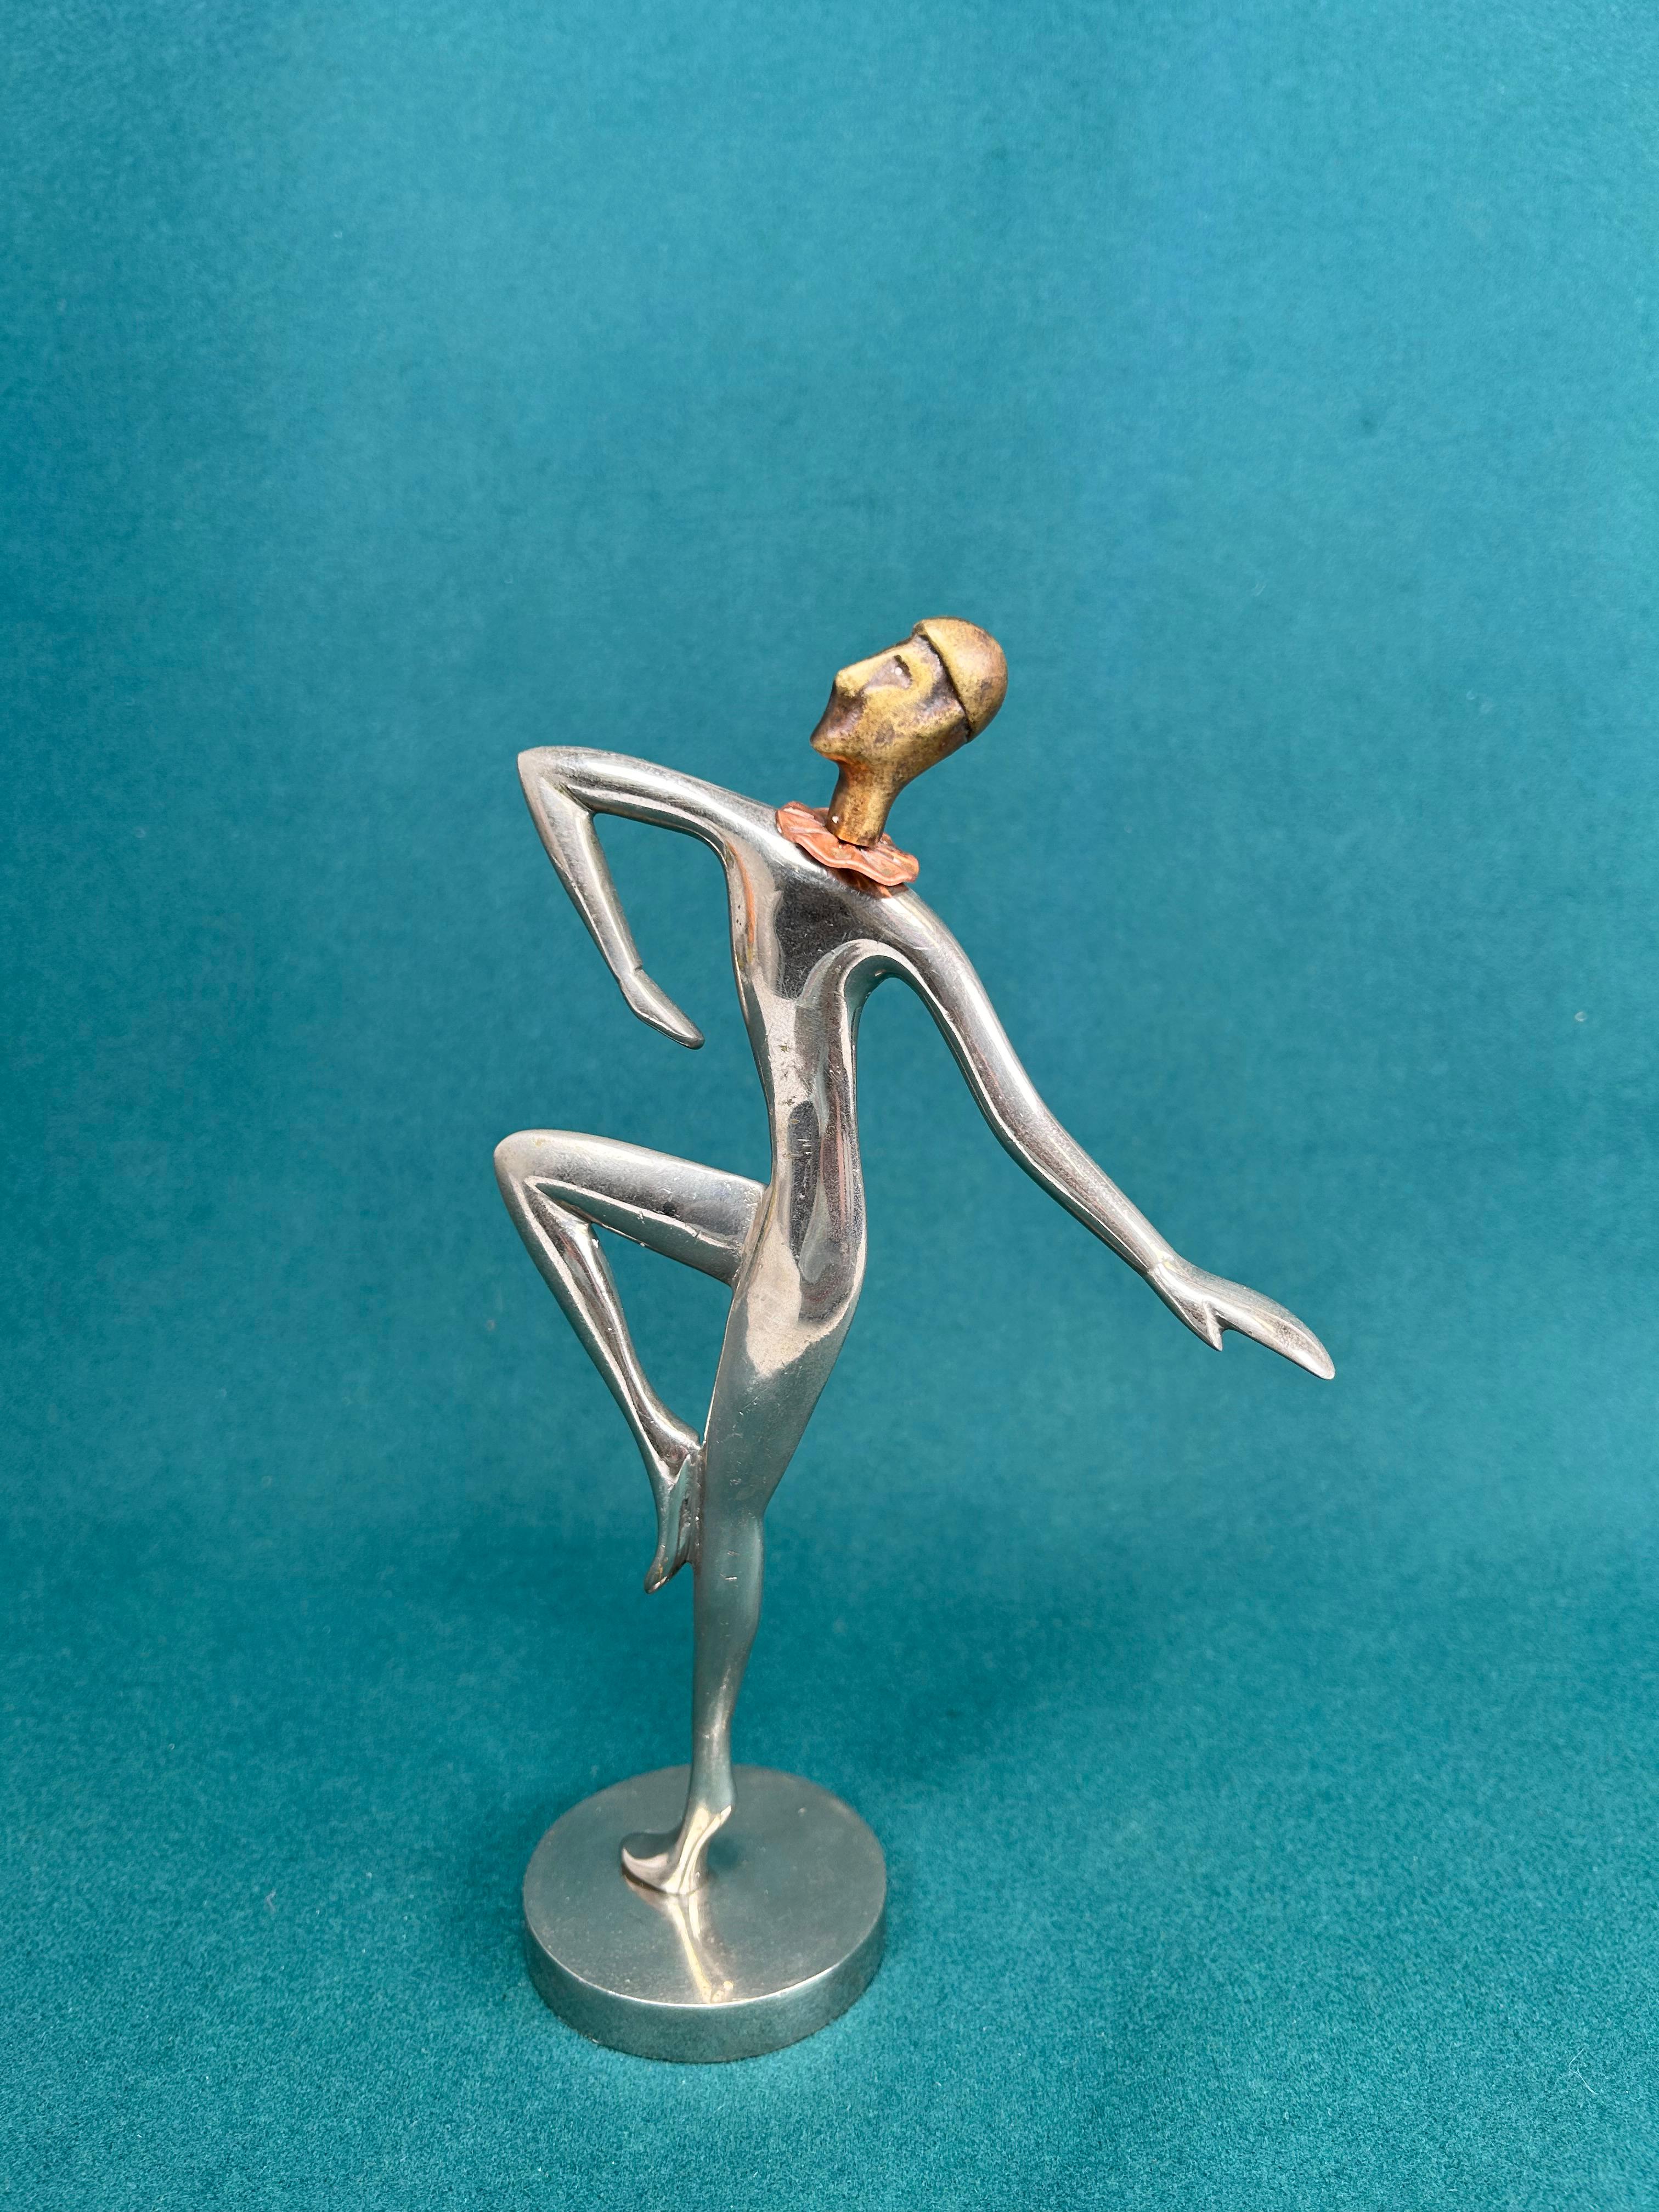 Dancing klown by Karl Hagenauaer. A wrought copper collar connects the bronze head with the metal body.